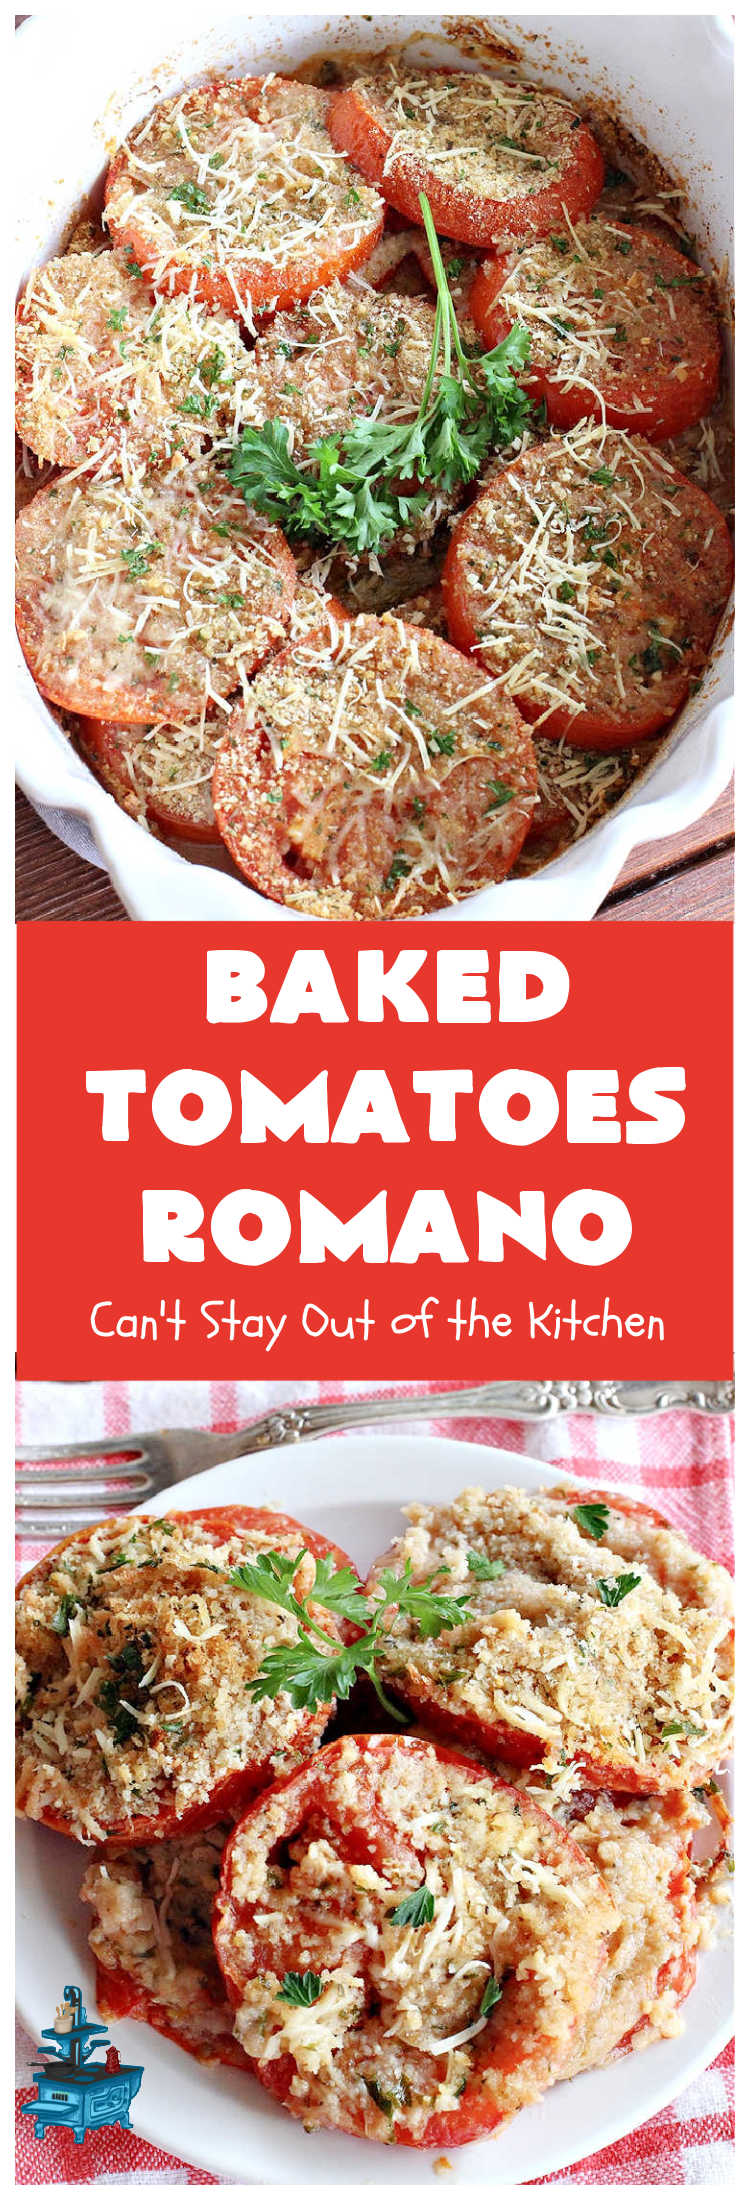 Baked Tomatoes Romano | Can't Stay Out of the Kitchen